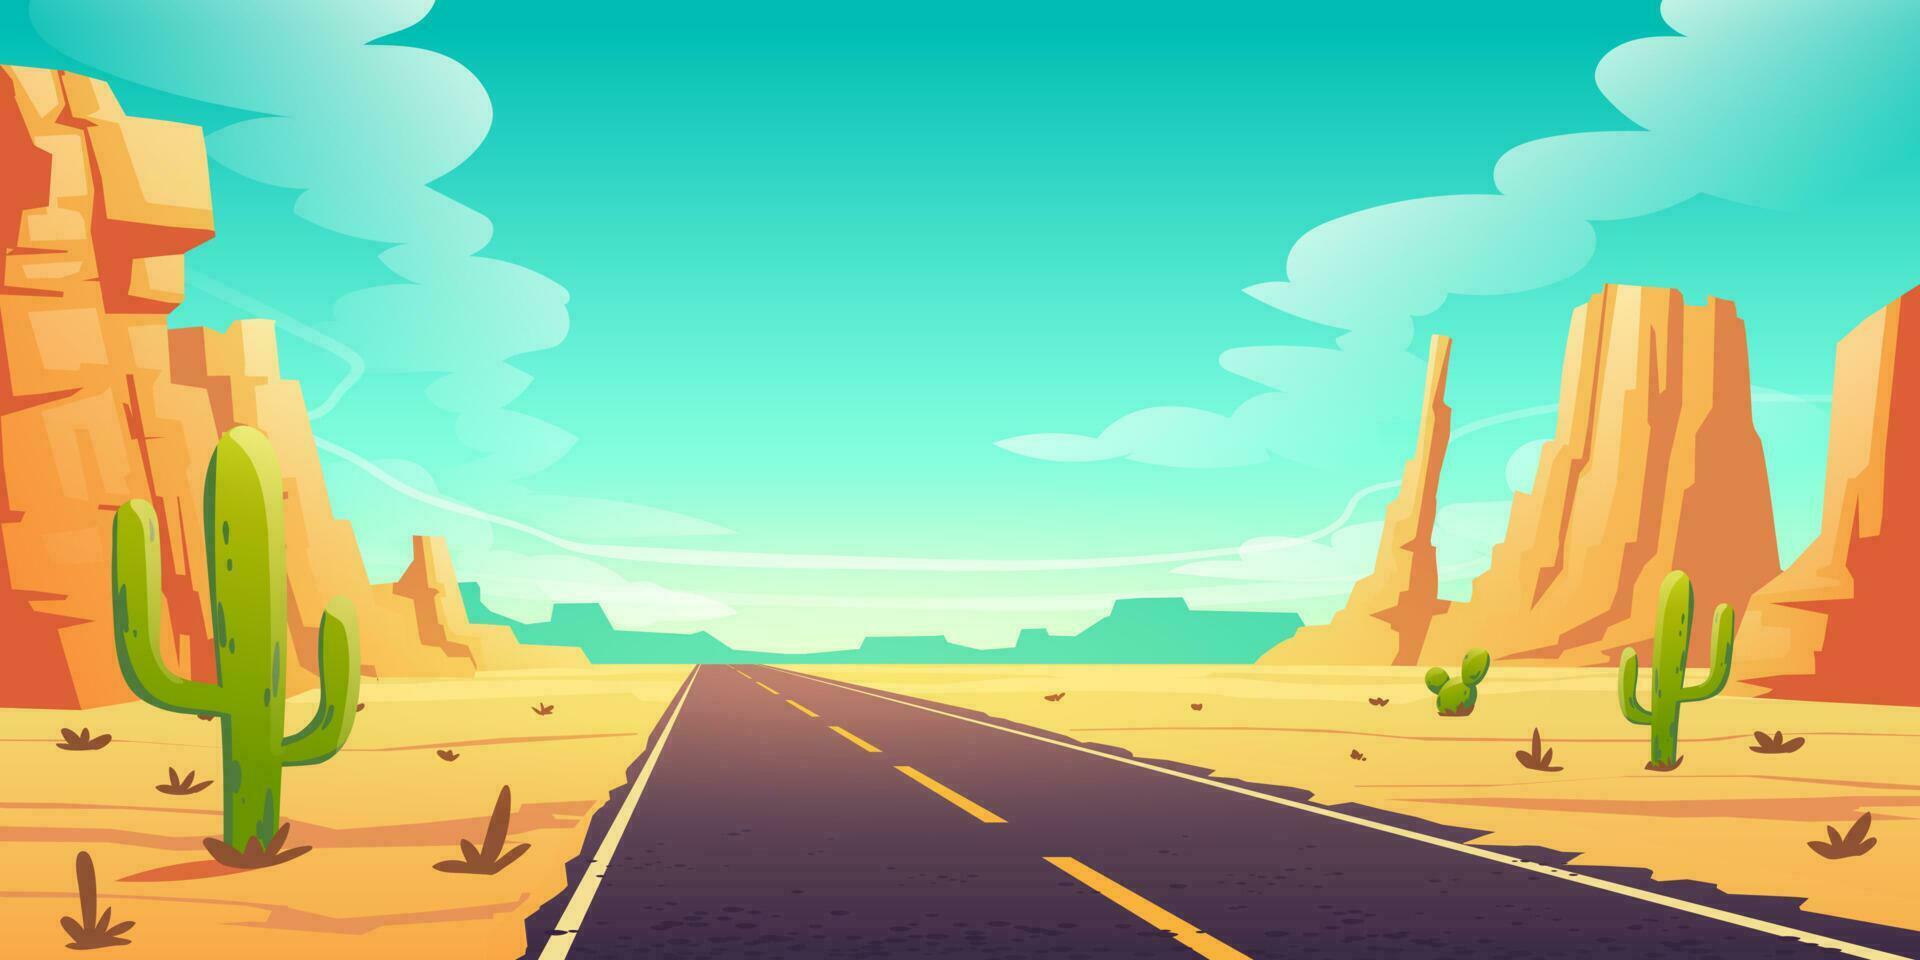 Desert landscape with road, cactuses and rocks vector